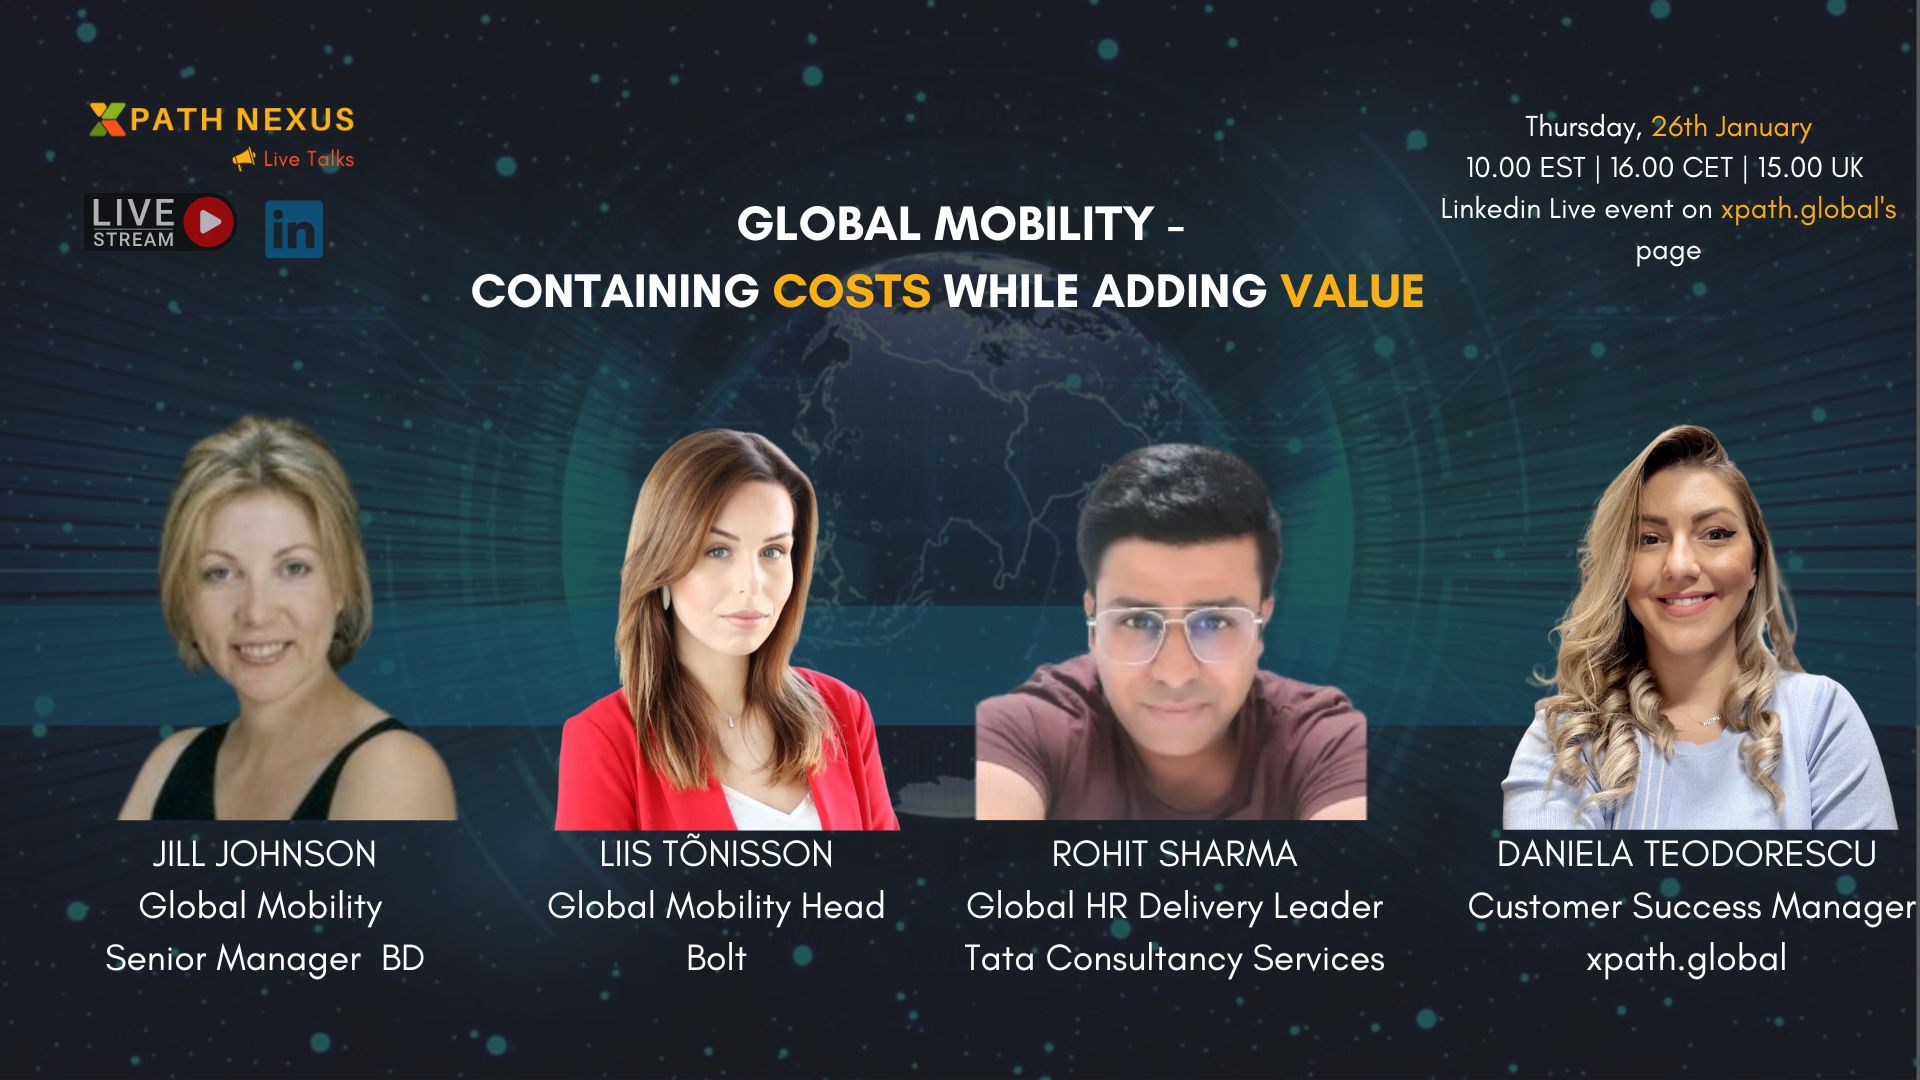 Global mobility: containing costs and adding value